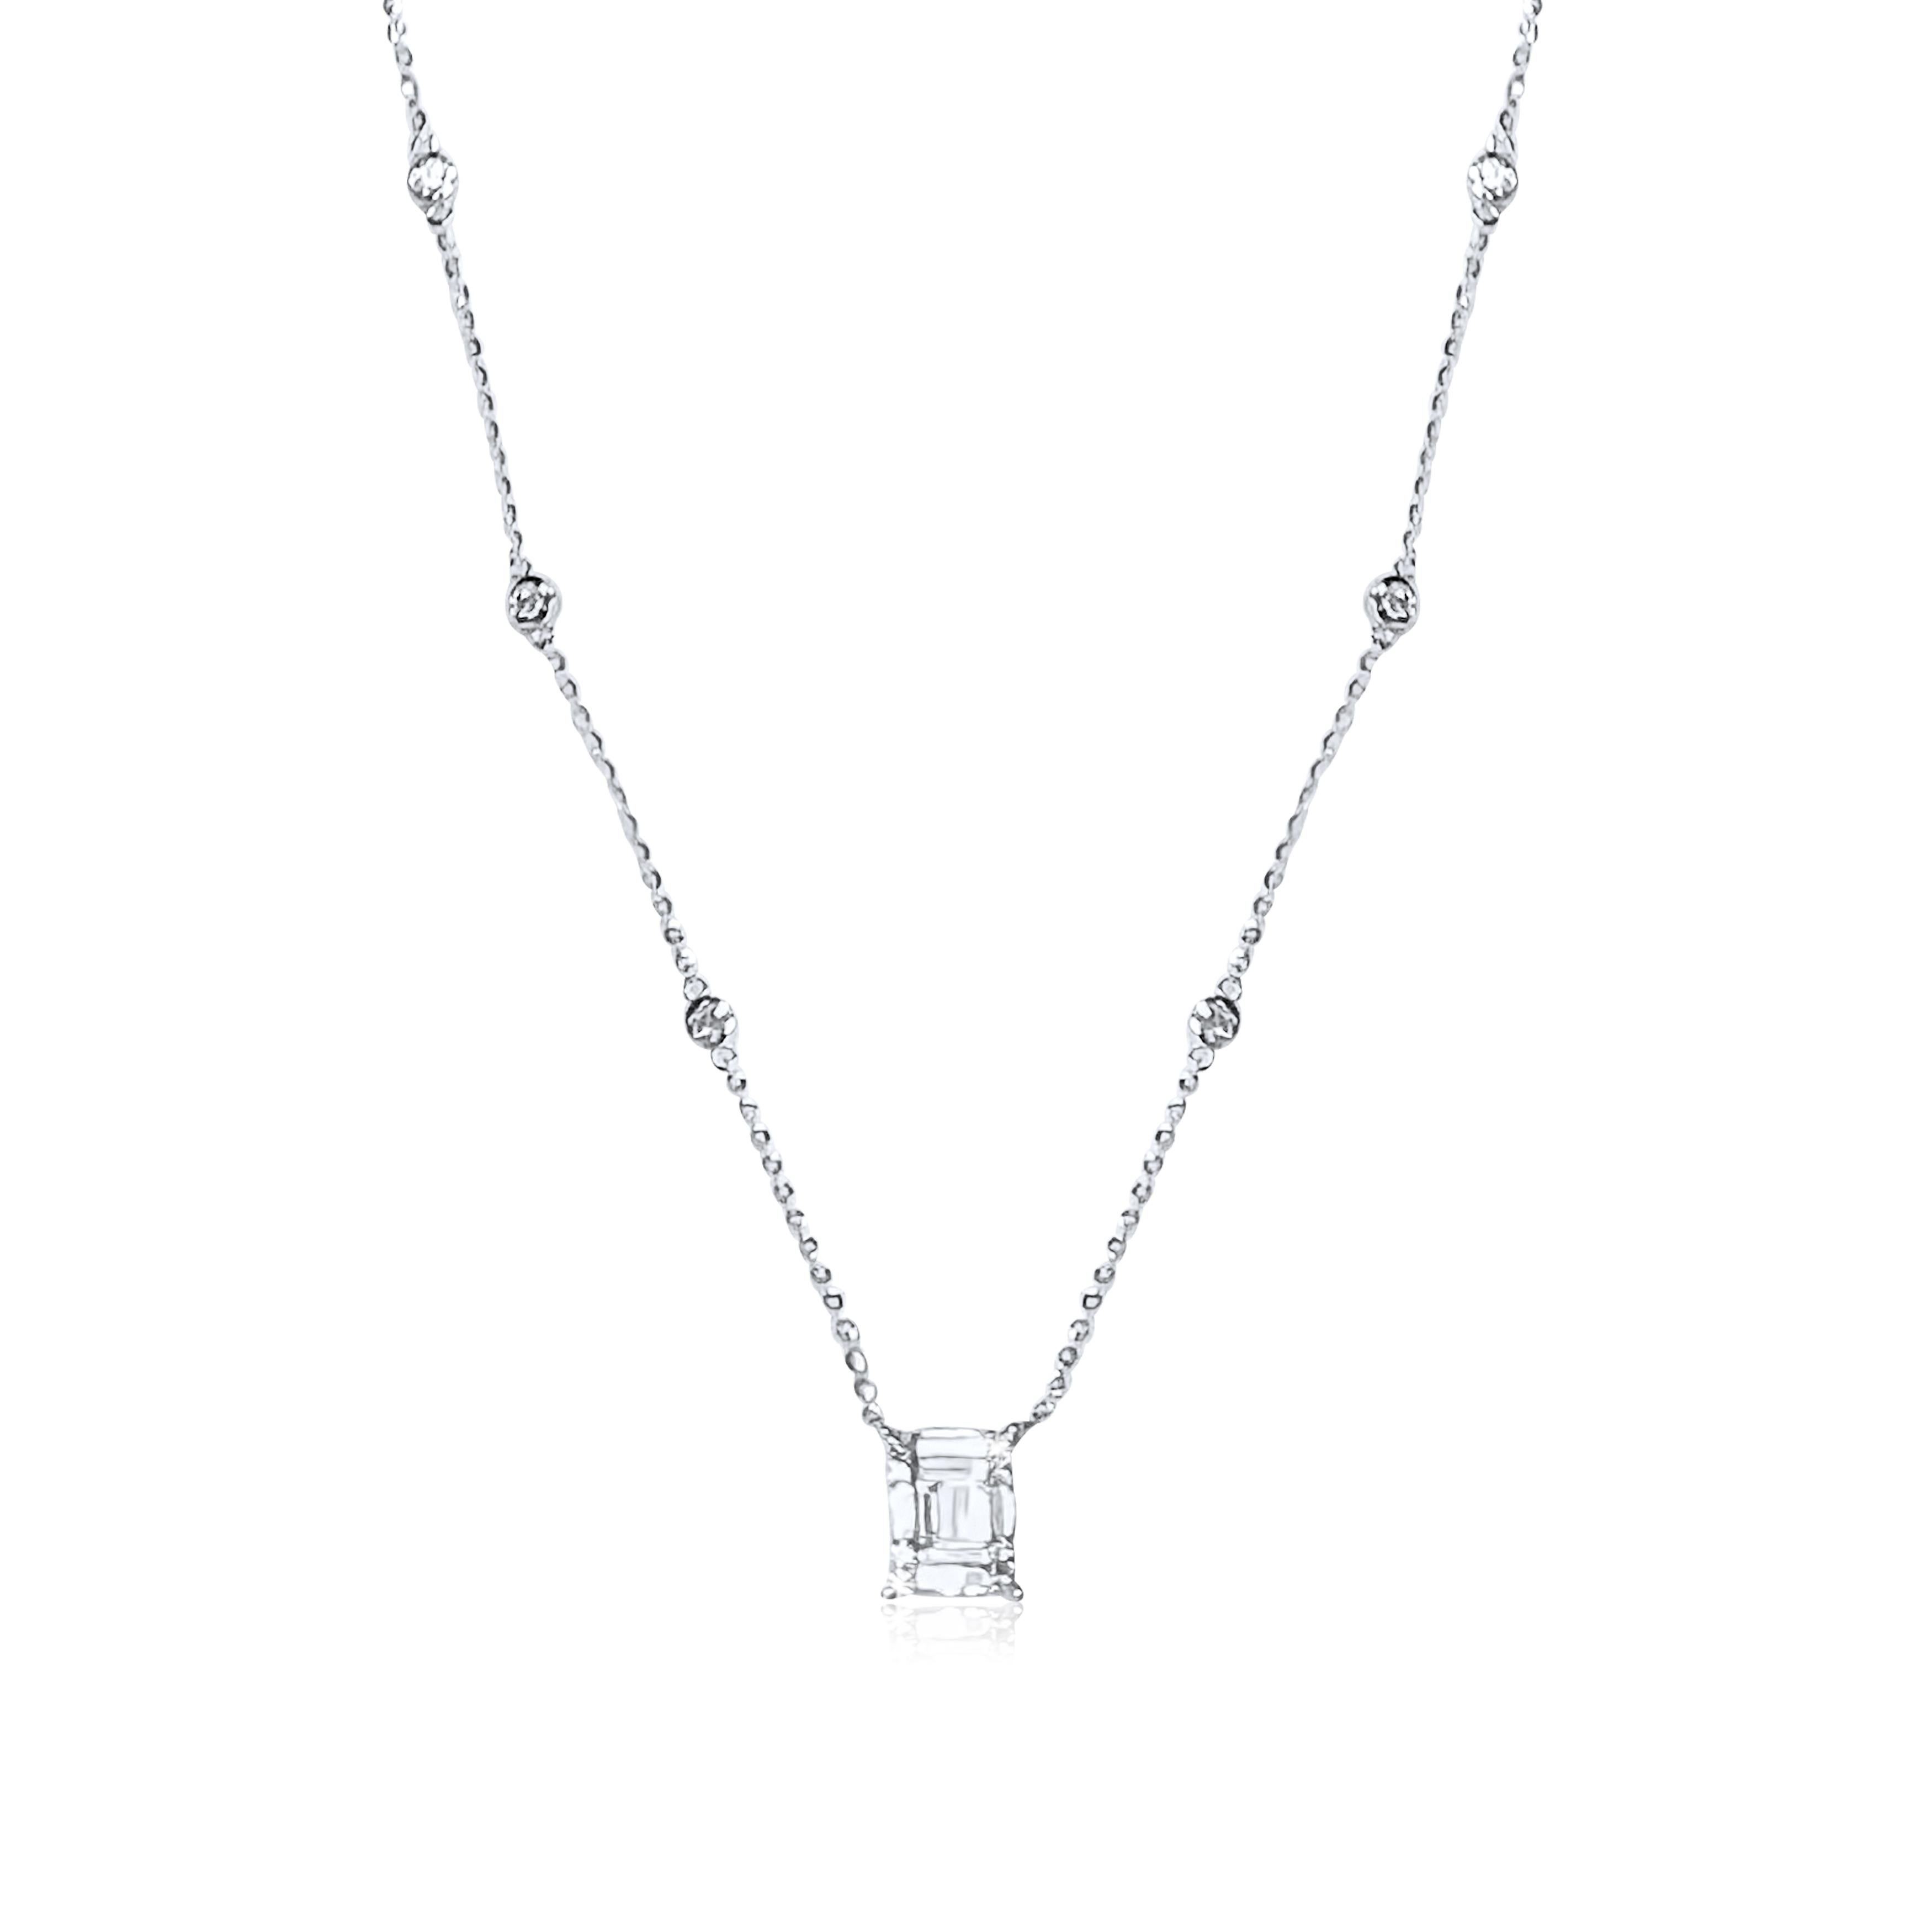 Necklace Information
Metal Purity: 18K
Color : White Gold
Gold Weight: 3.87g
Diamond Count : 14 Round Diamonds
Round Diamond Carat Weight: 0.45 ttcw
Baguette Diamonds Count: 9
Baguette Diamonds Carat Weight: 0.52 ttcw
Serial #NE15113

 
Introducing